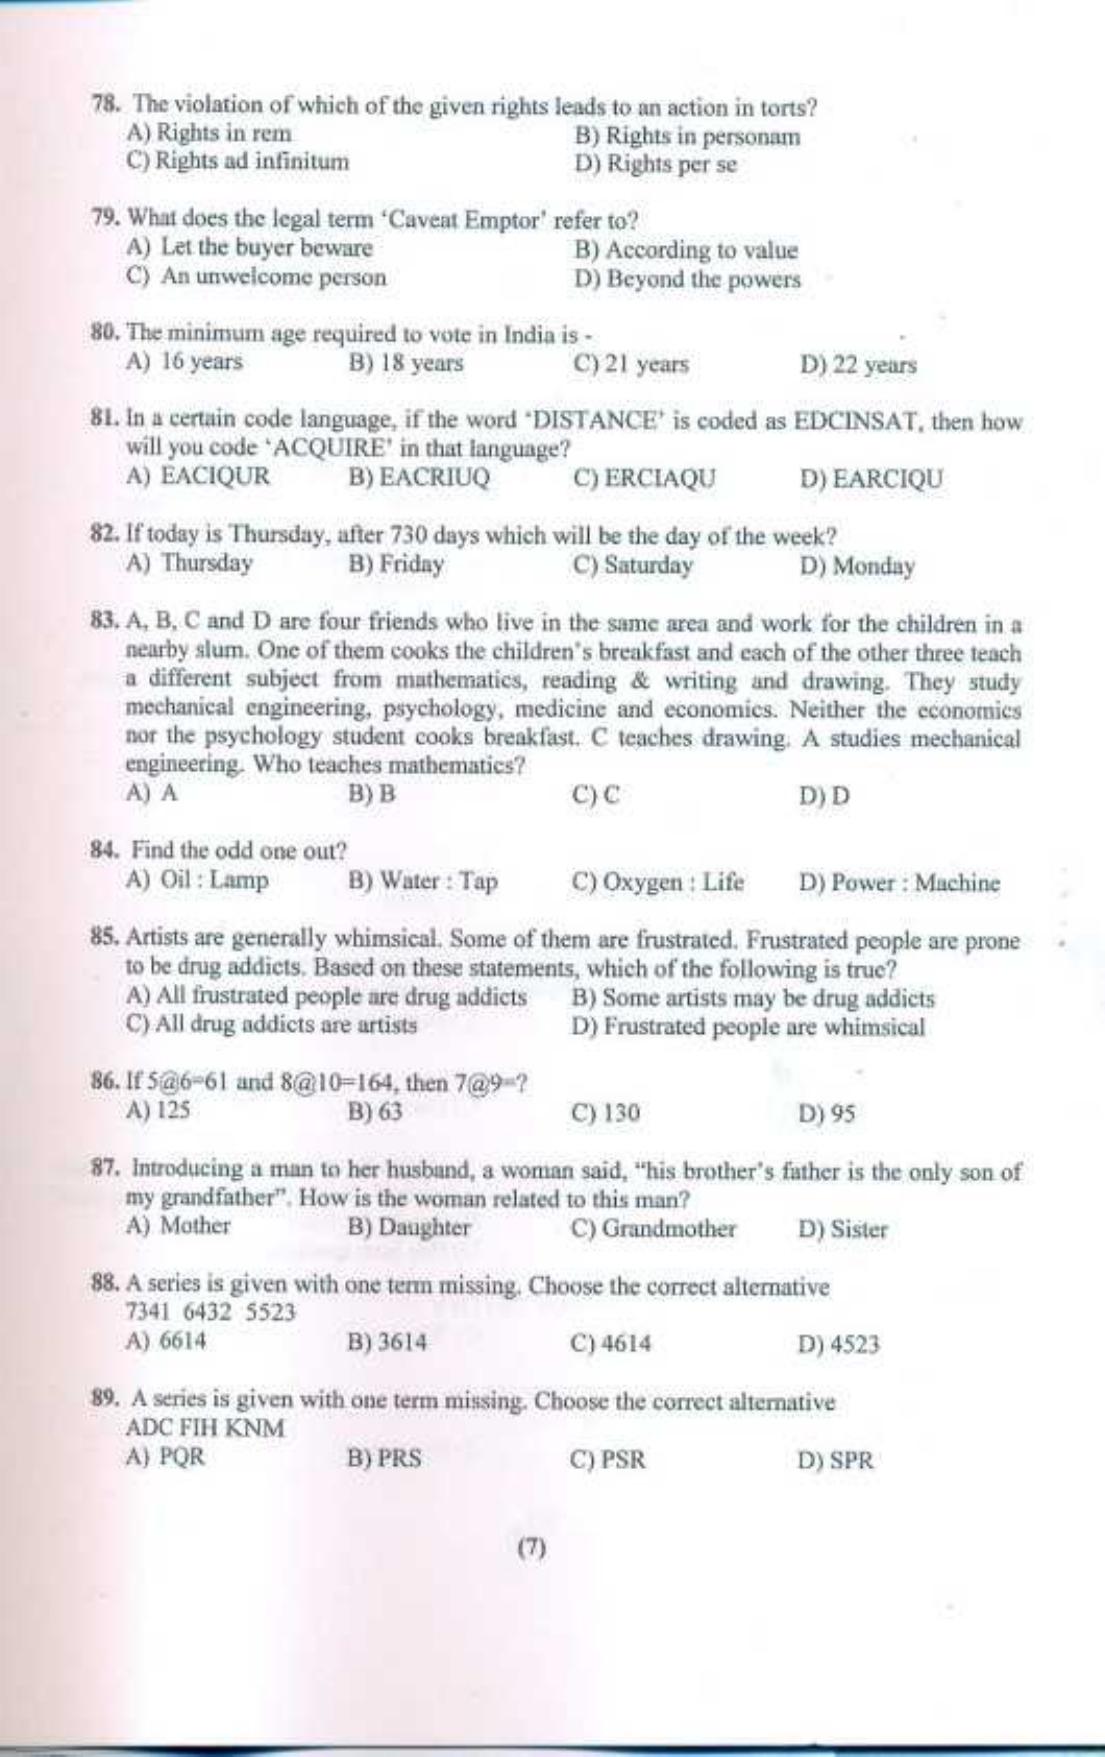 PU LLB 2019 Question Paper - Page 8